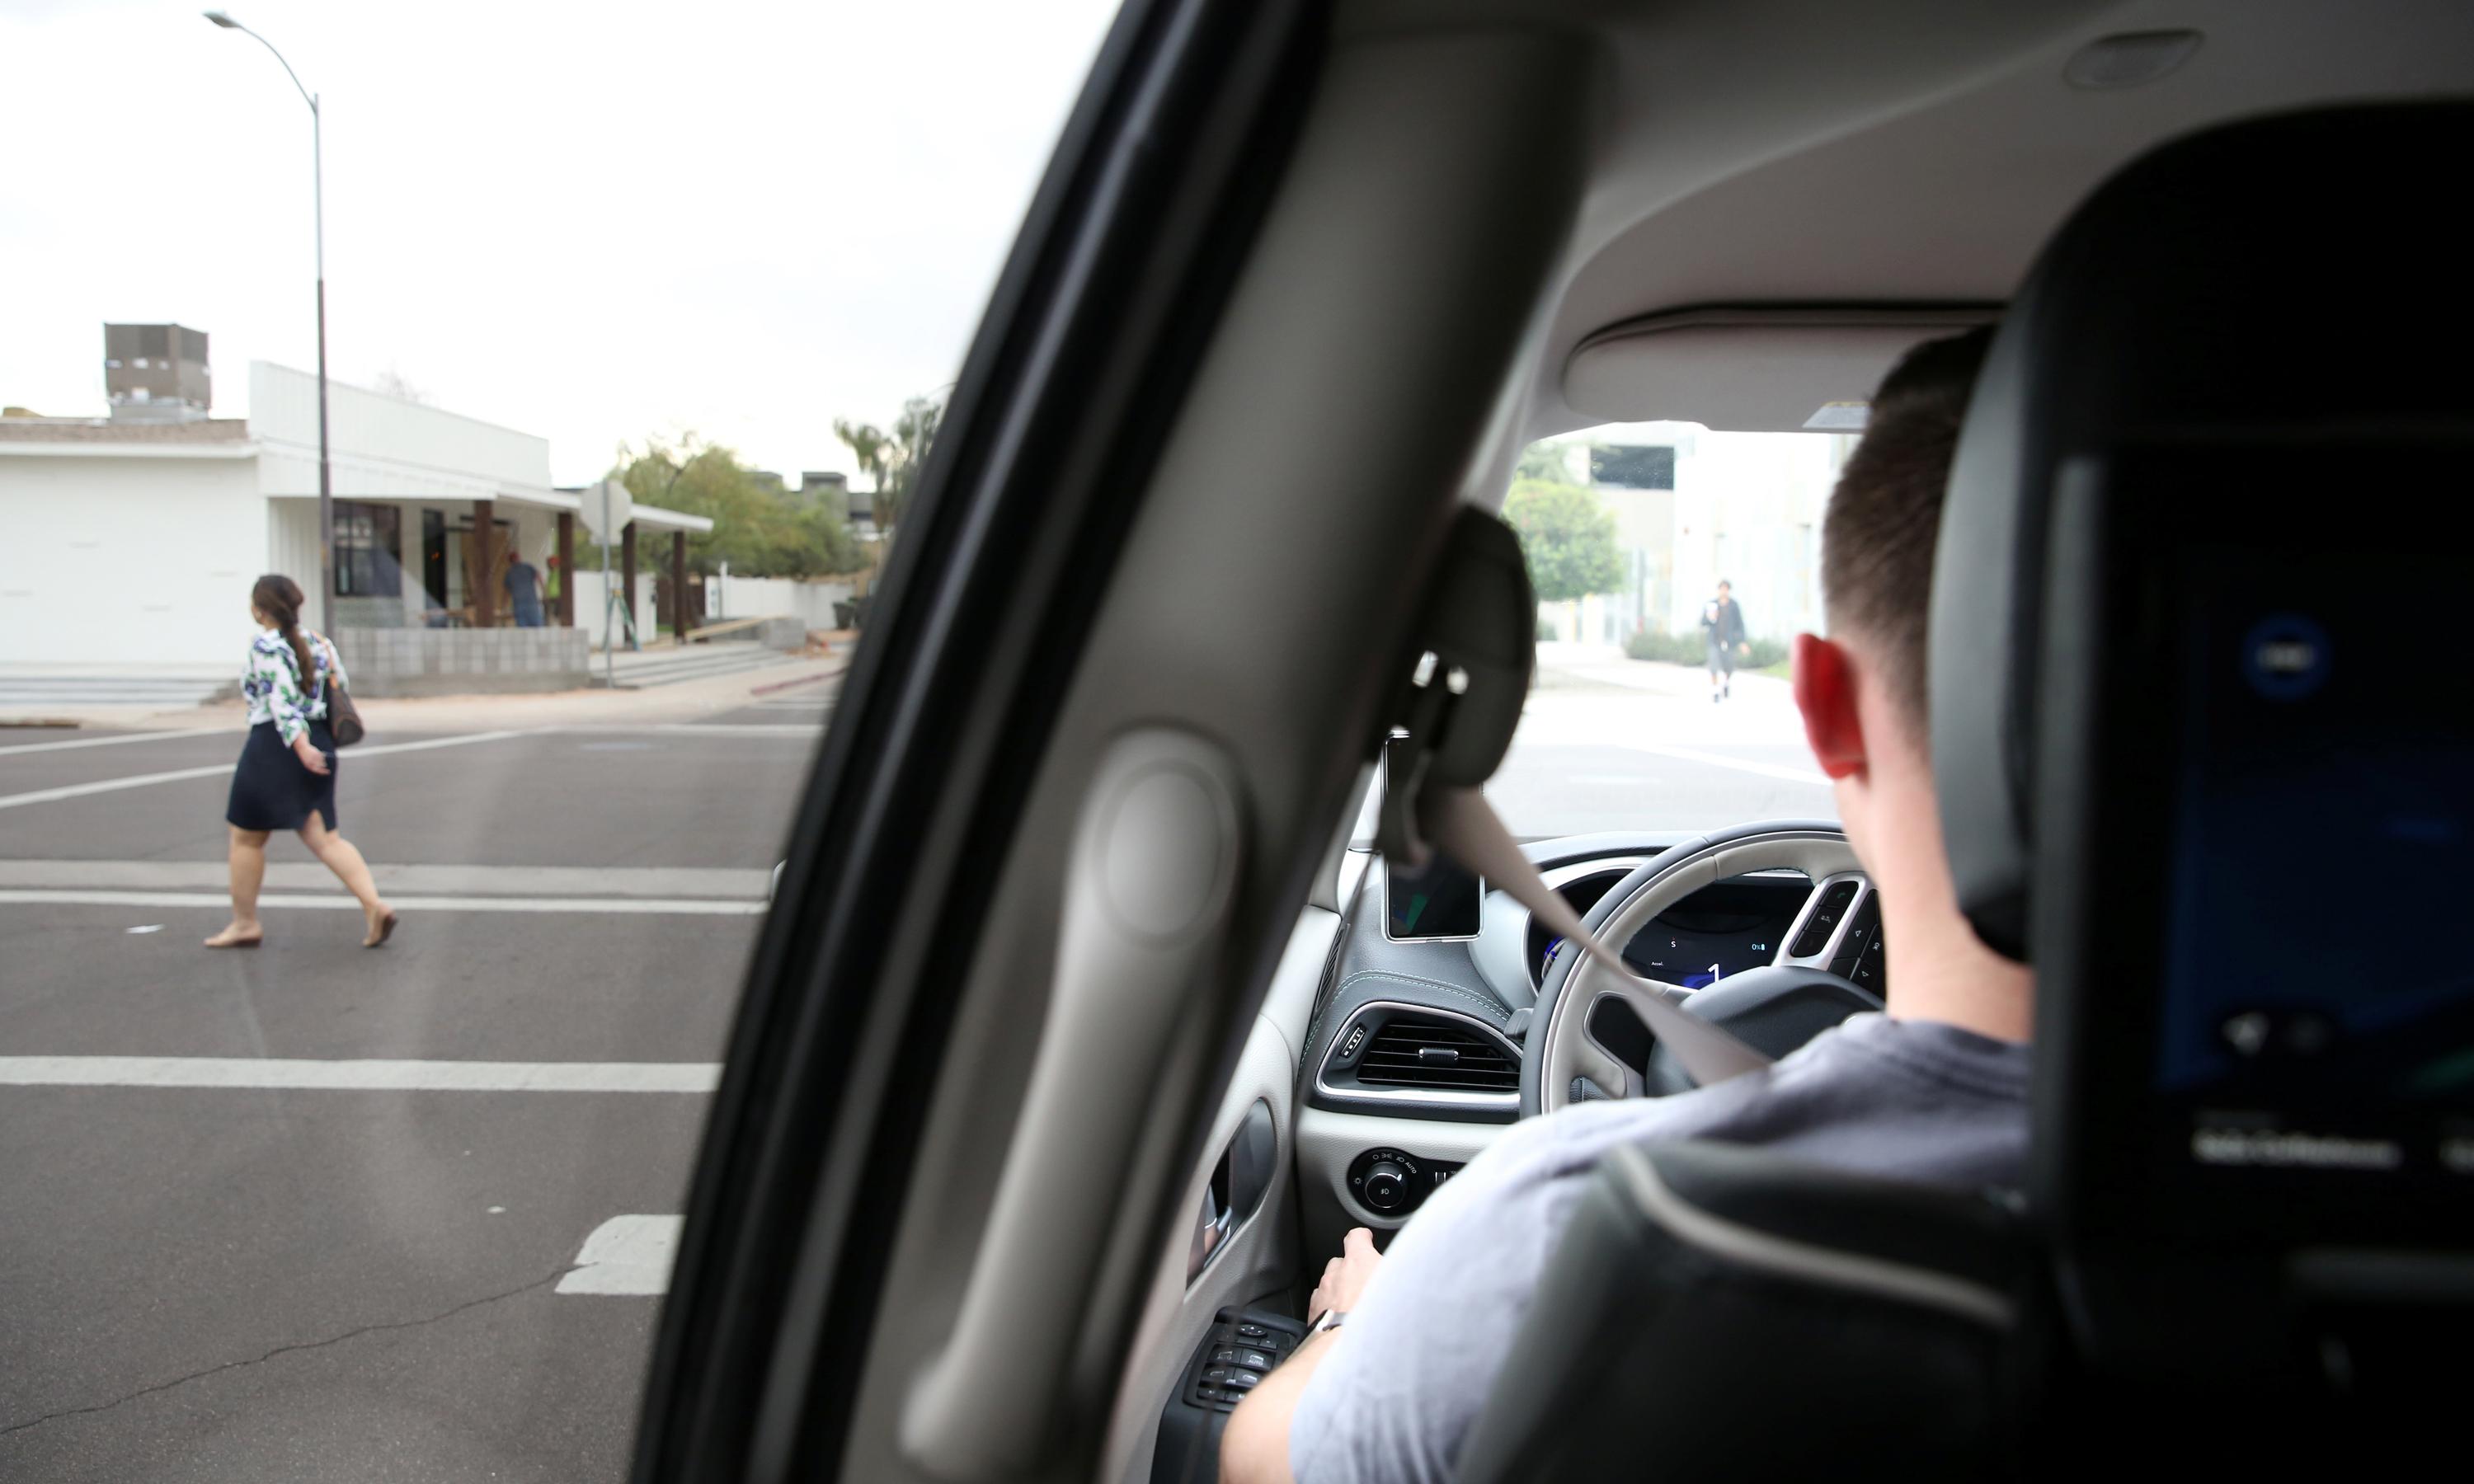 A person in the driver's seat of an autonomous vehicles looks at a pedestrian on a crosswalk.